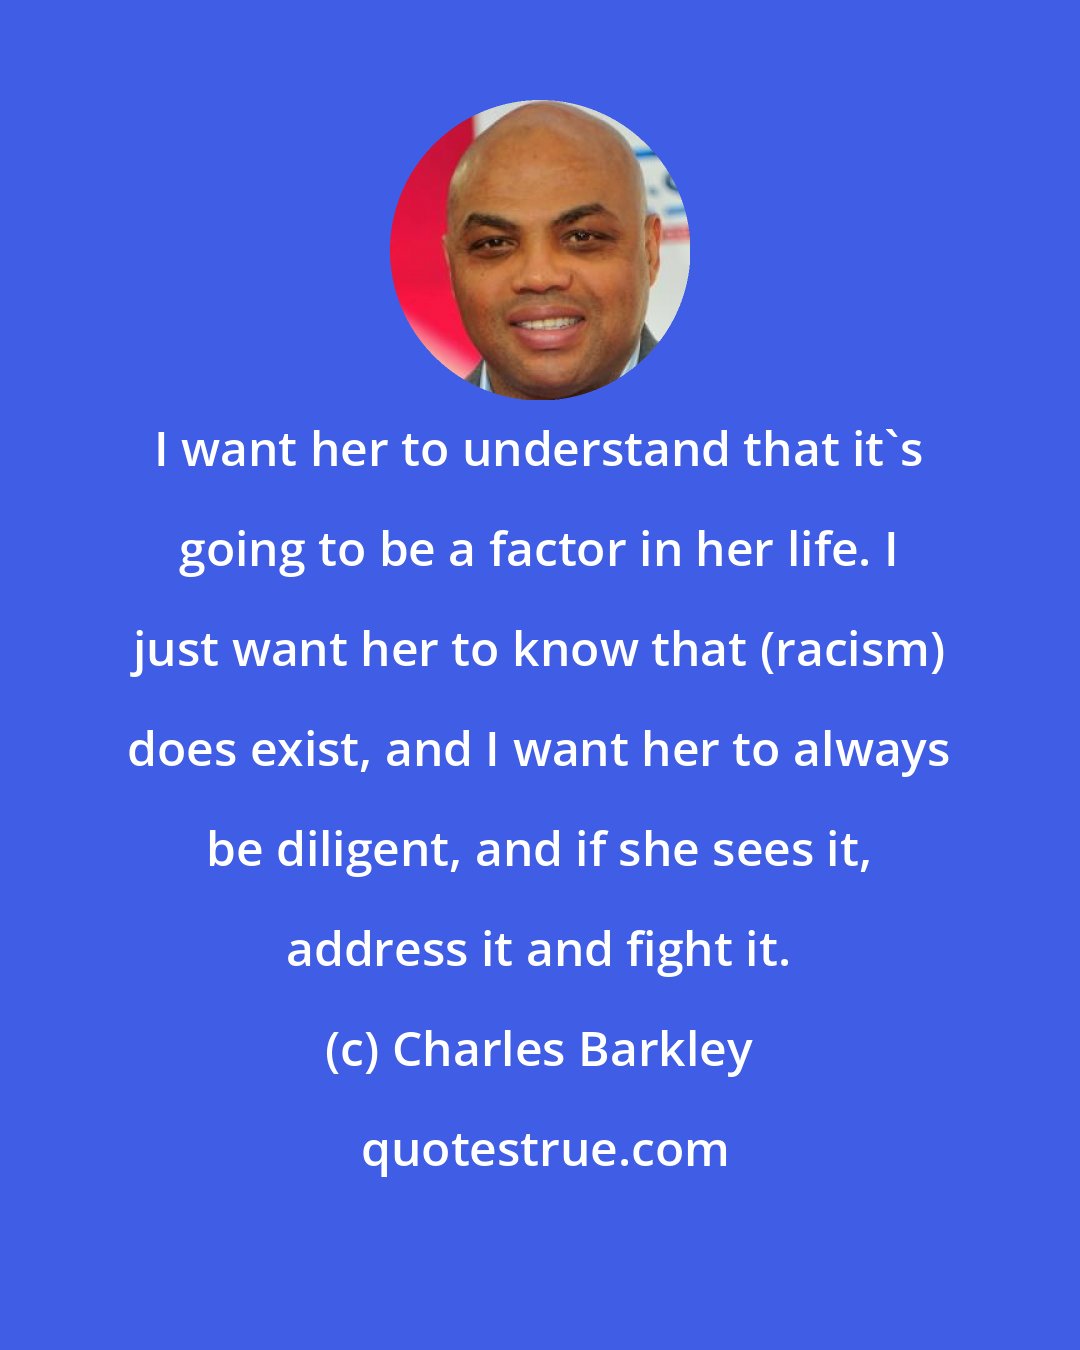 Charles Barkley: I want her to understand that it's going to be a factor in her life. I just want her to know that (racism) does exist, and I want her to always be diligent, and if she sees it, address it and fight it.